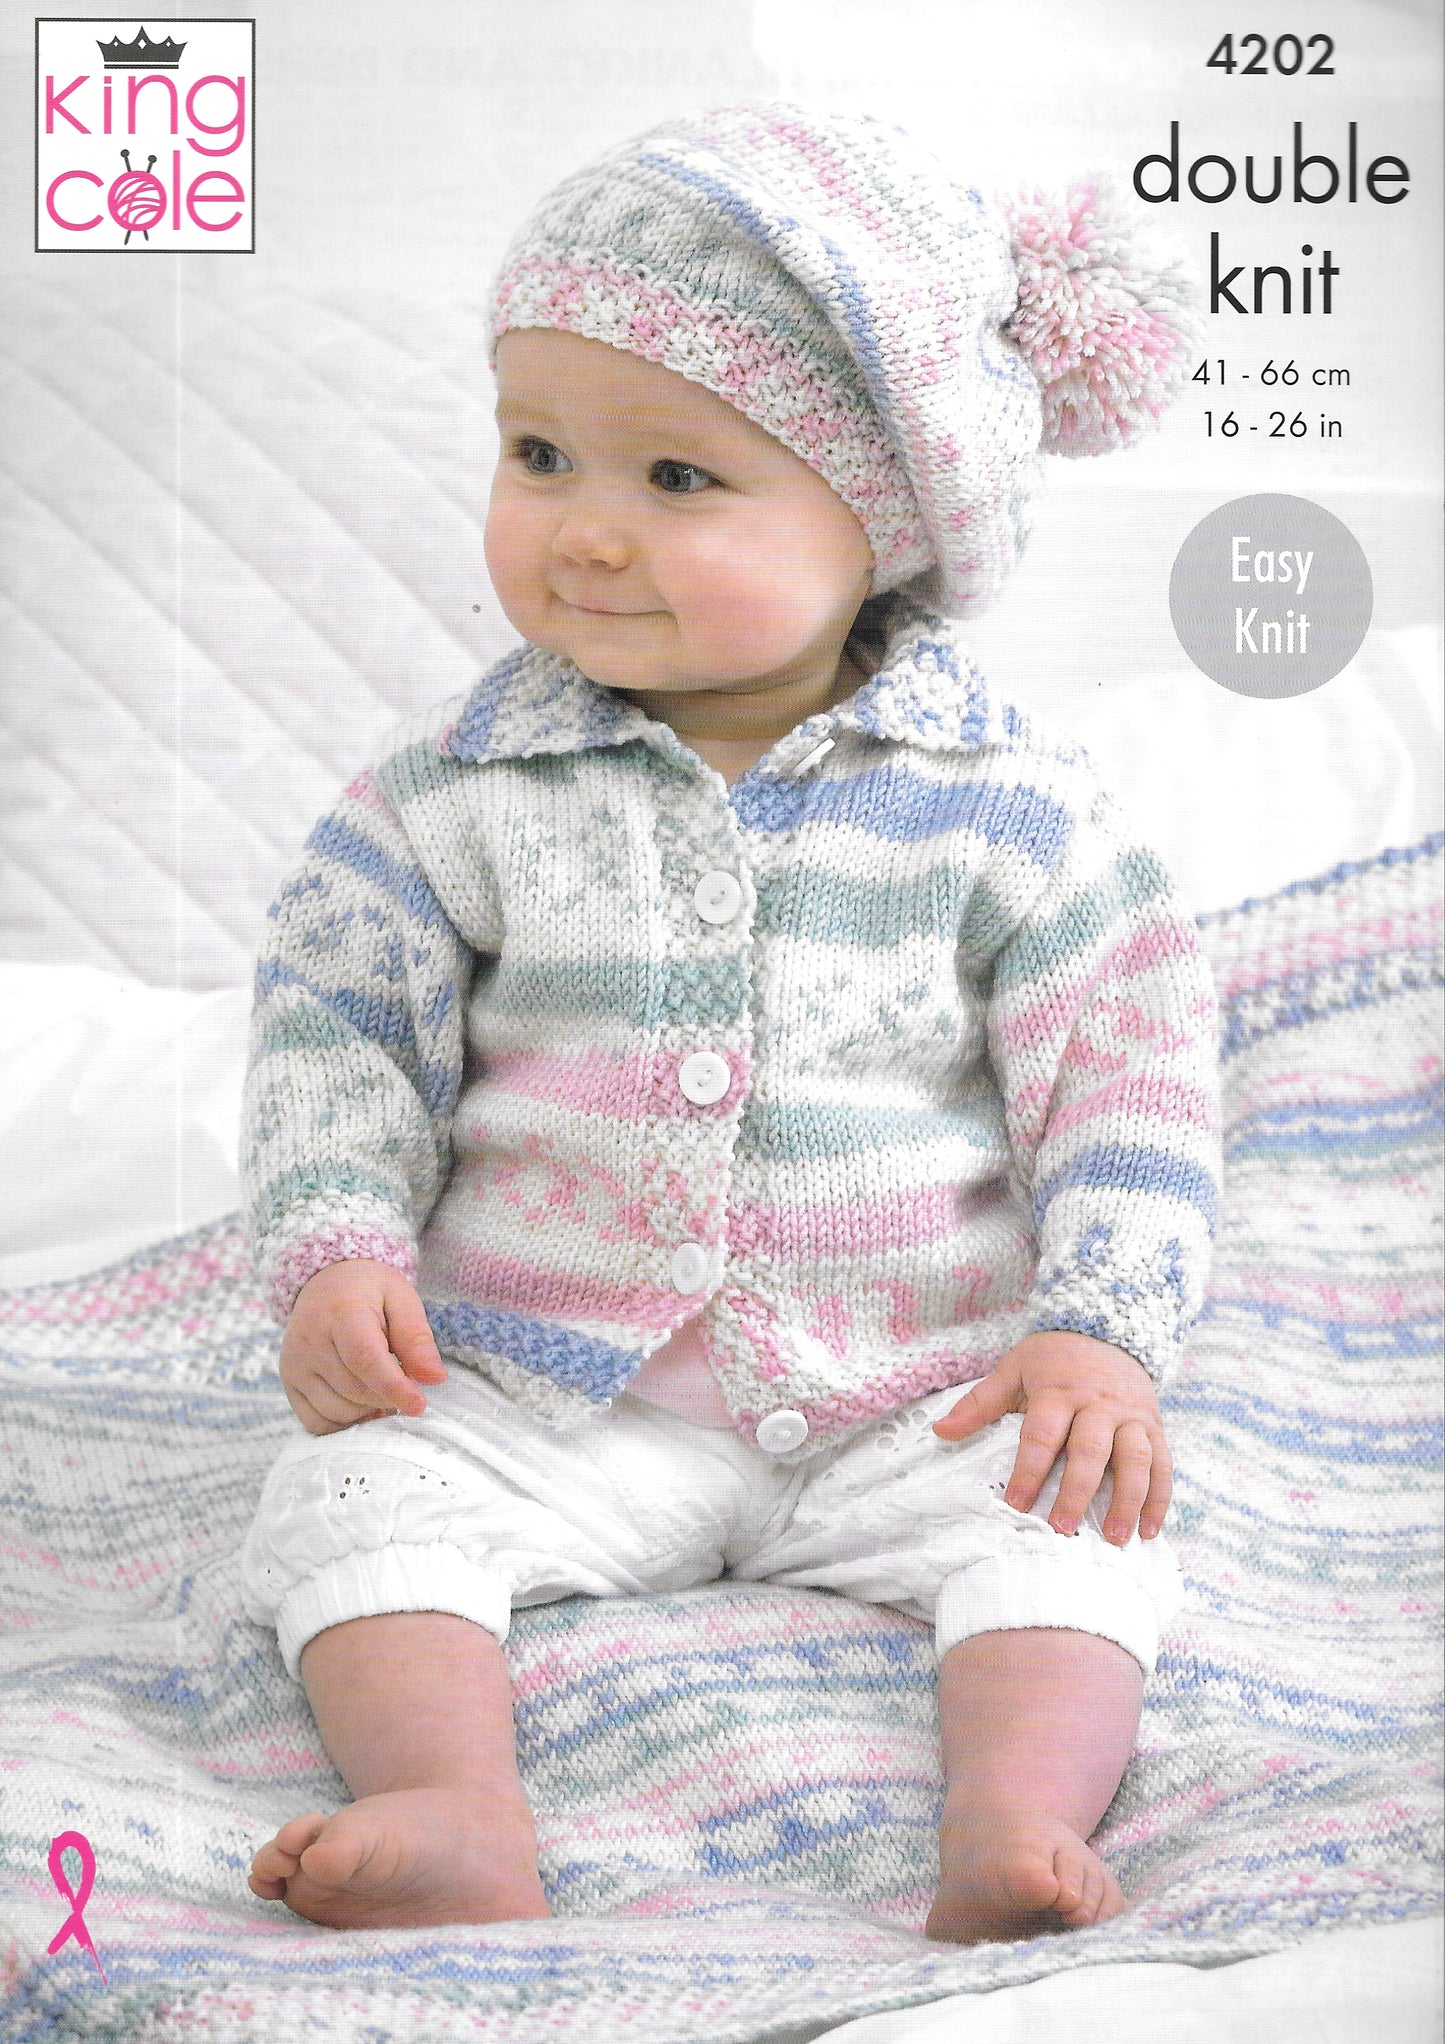 4202 King Cole Knitting Pattern. Baby Cardigans/Blanket/Beret. Double Knit